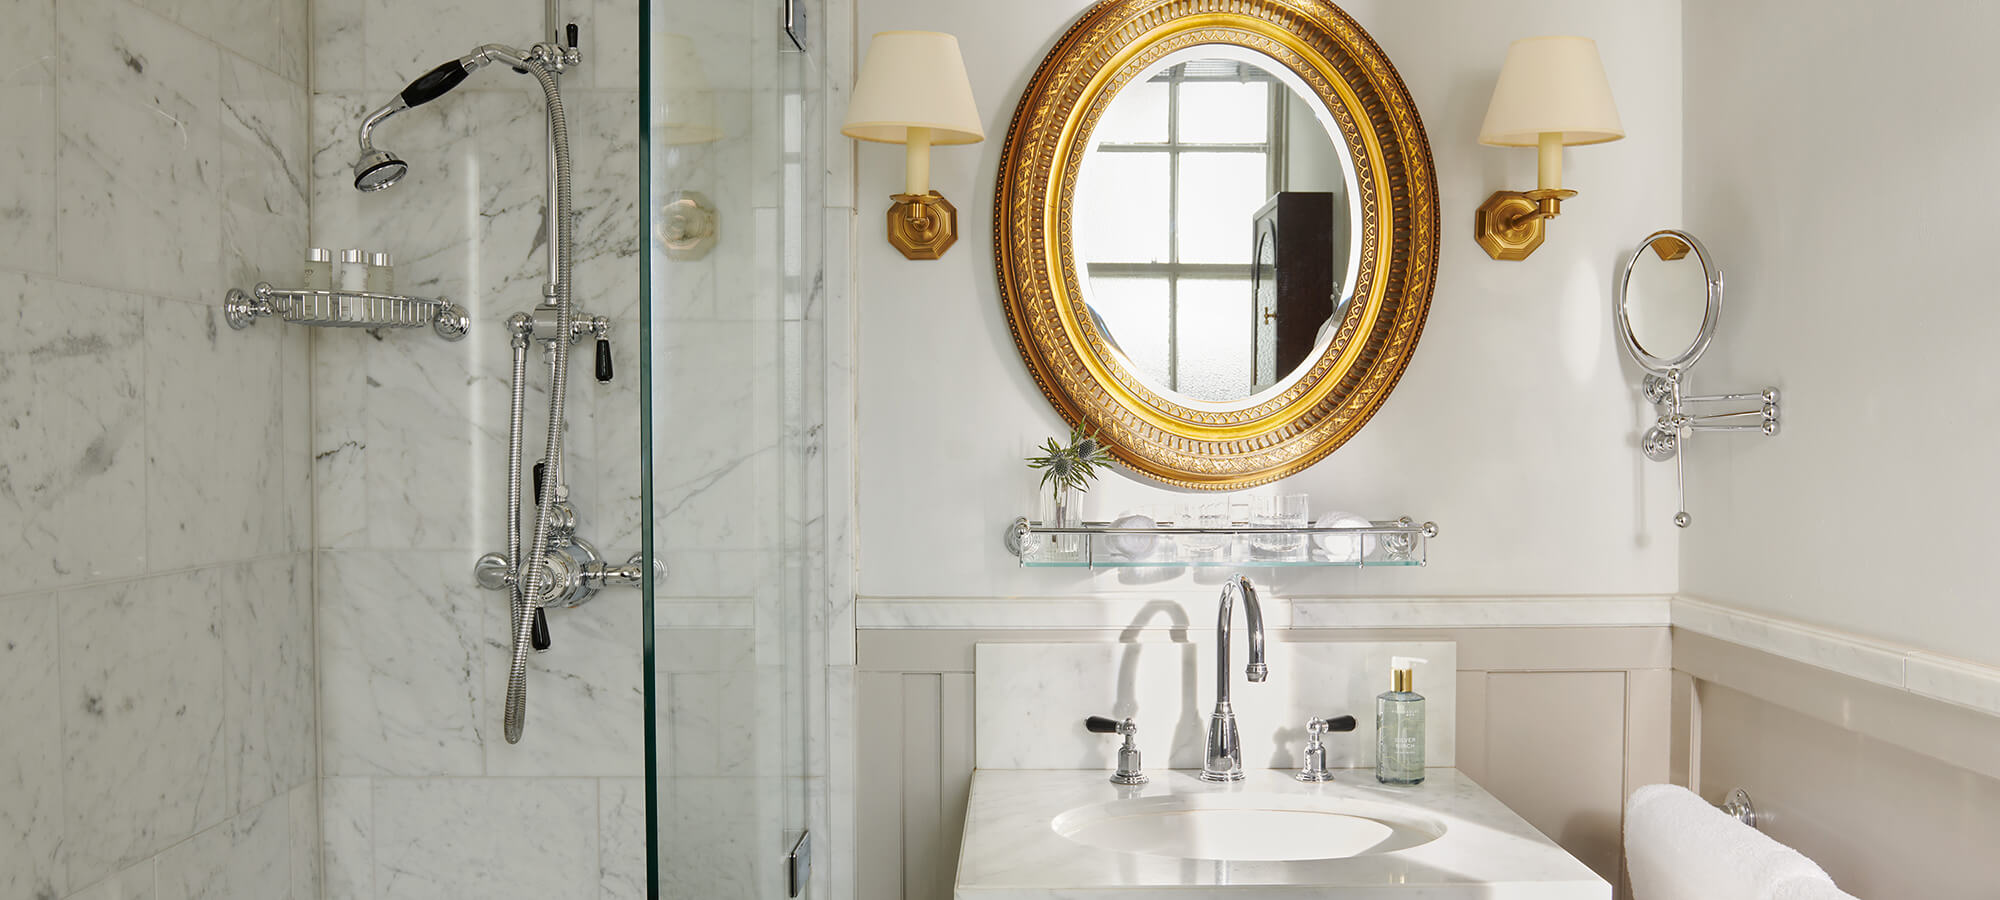 A large gold mirror above a white porcelain wash basin in a Country Room